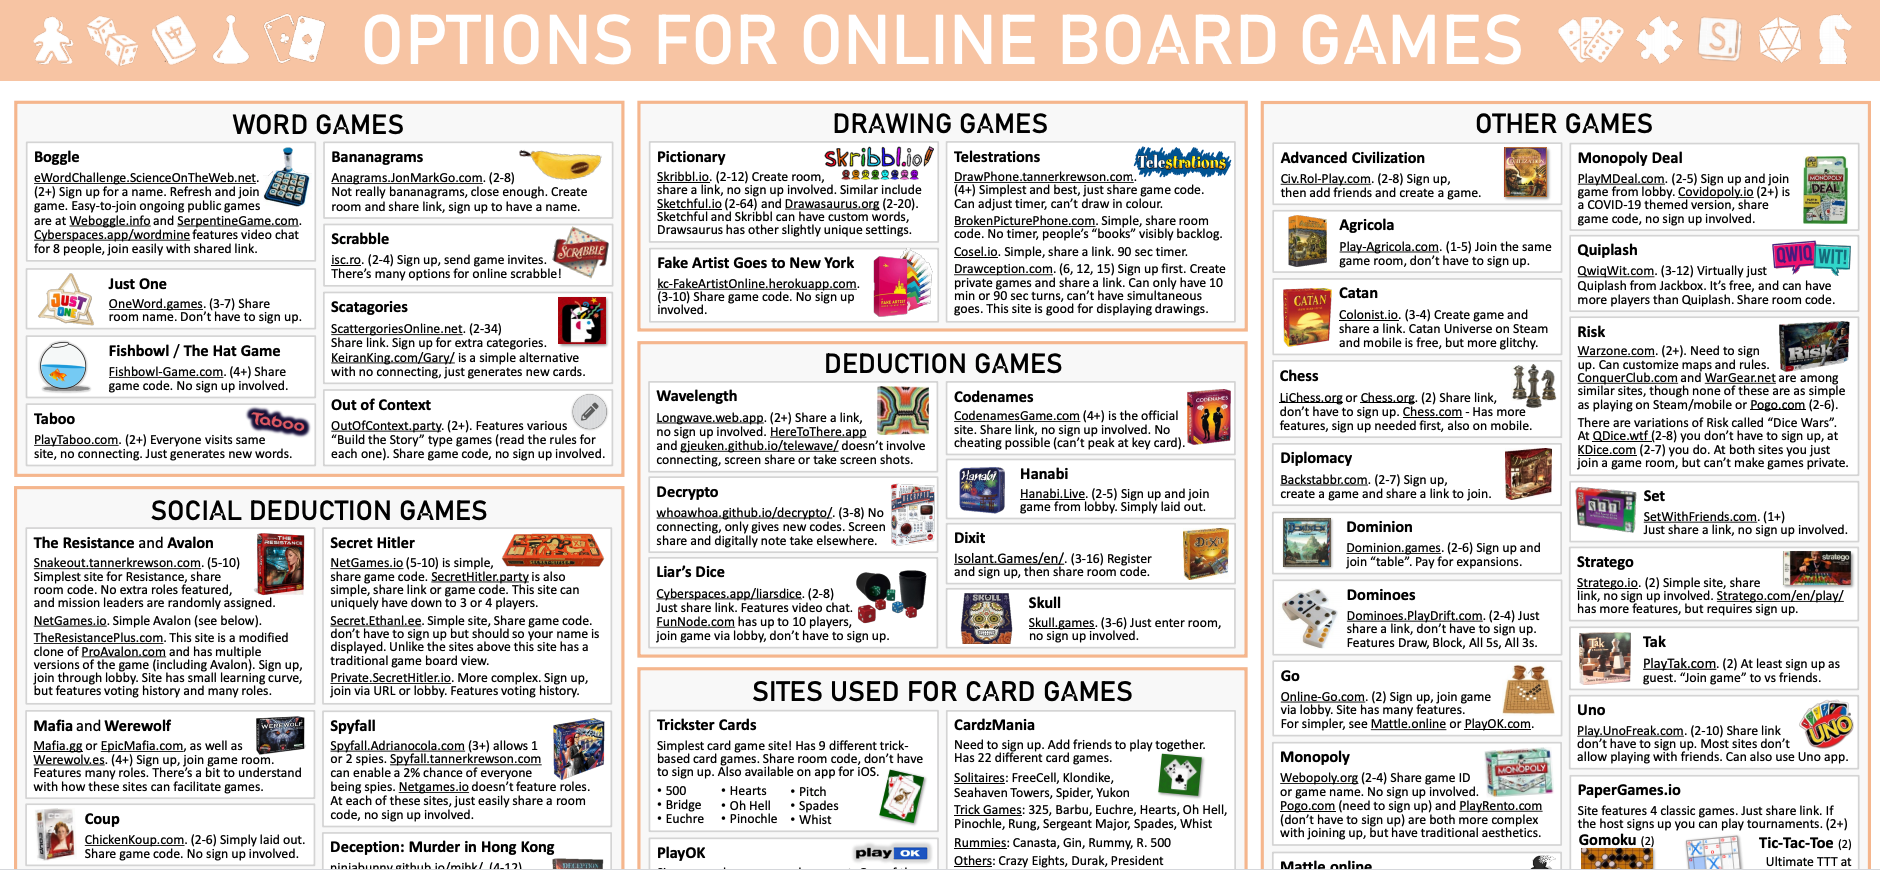 Big List of Options for Online Board Games (Updated). A PDF